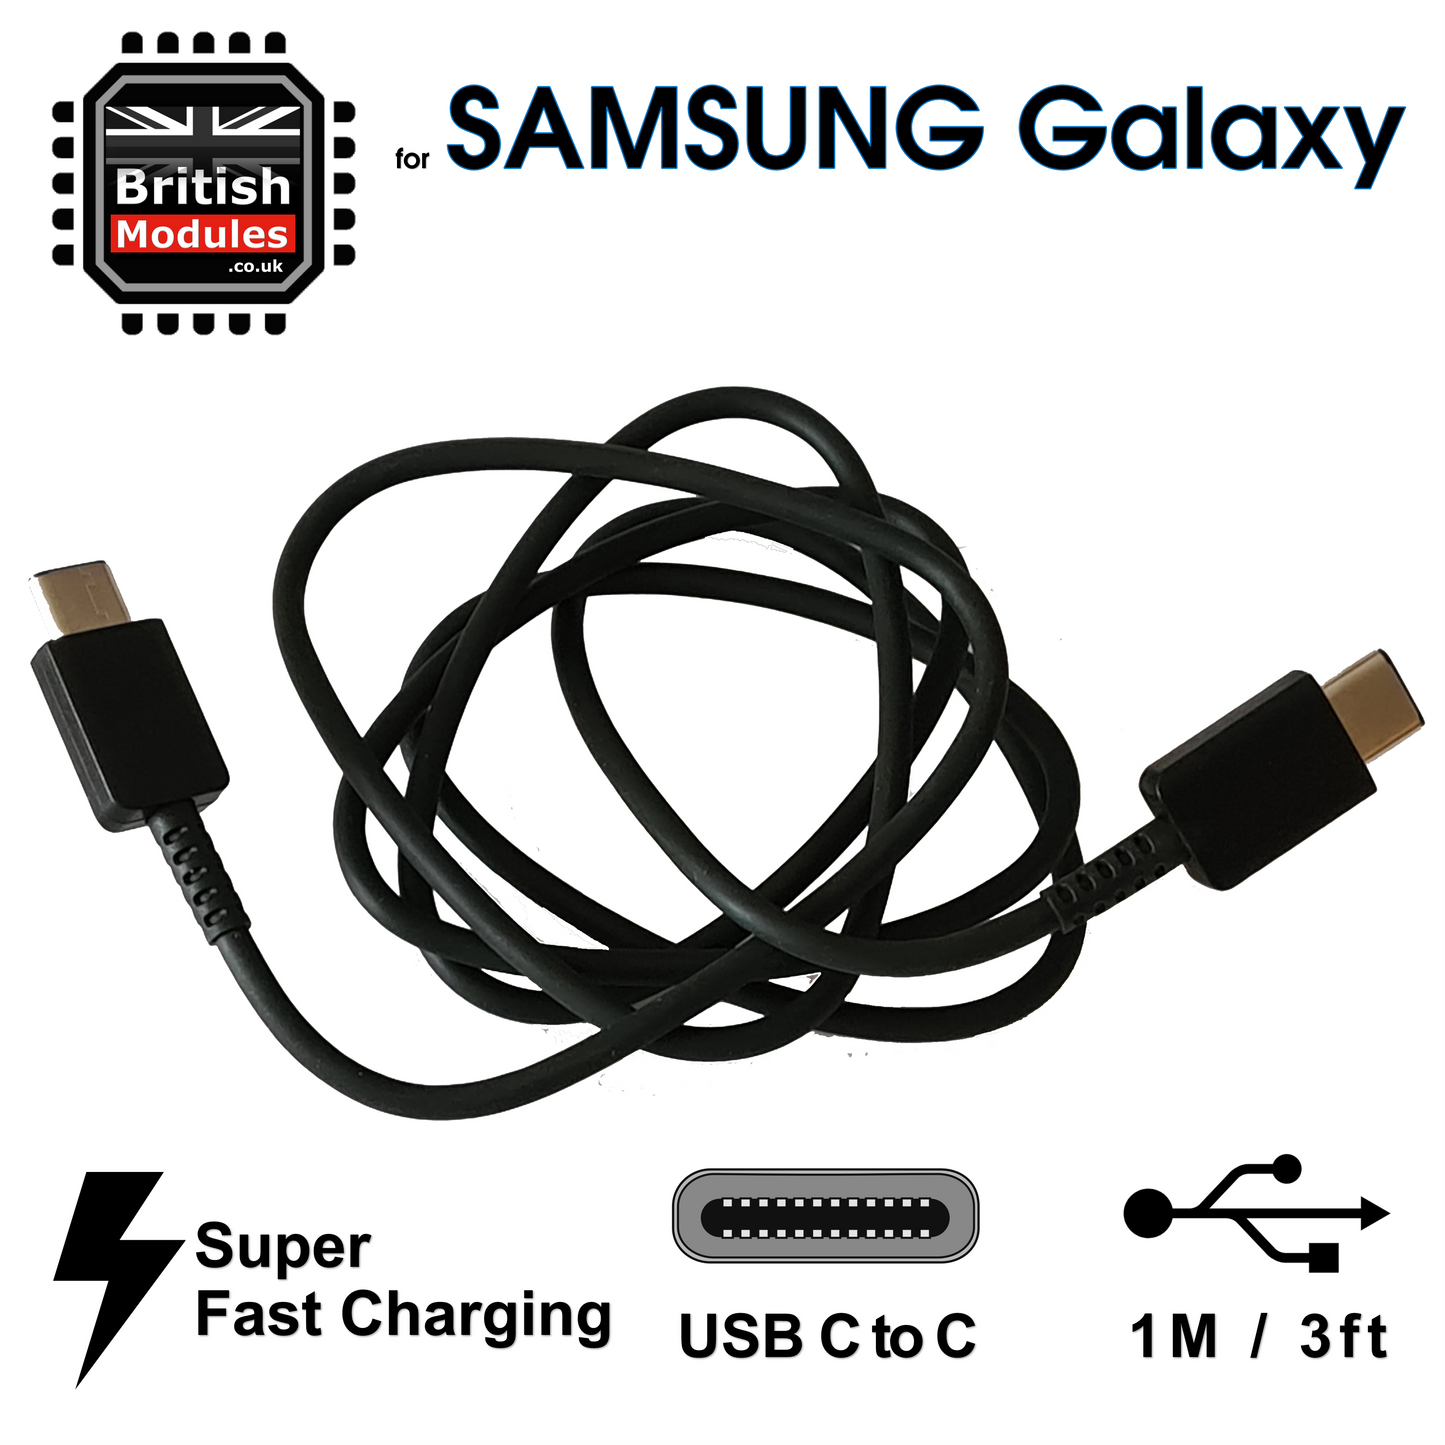 Samsung EP-DG977BBE Data Super Fast Charging Cable USB Type-C to USB-C for Galaxy Note10 Note20 Ultra 5G FE S20 S21 S22 Black